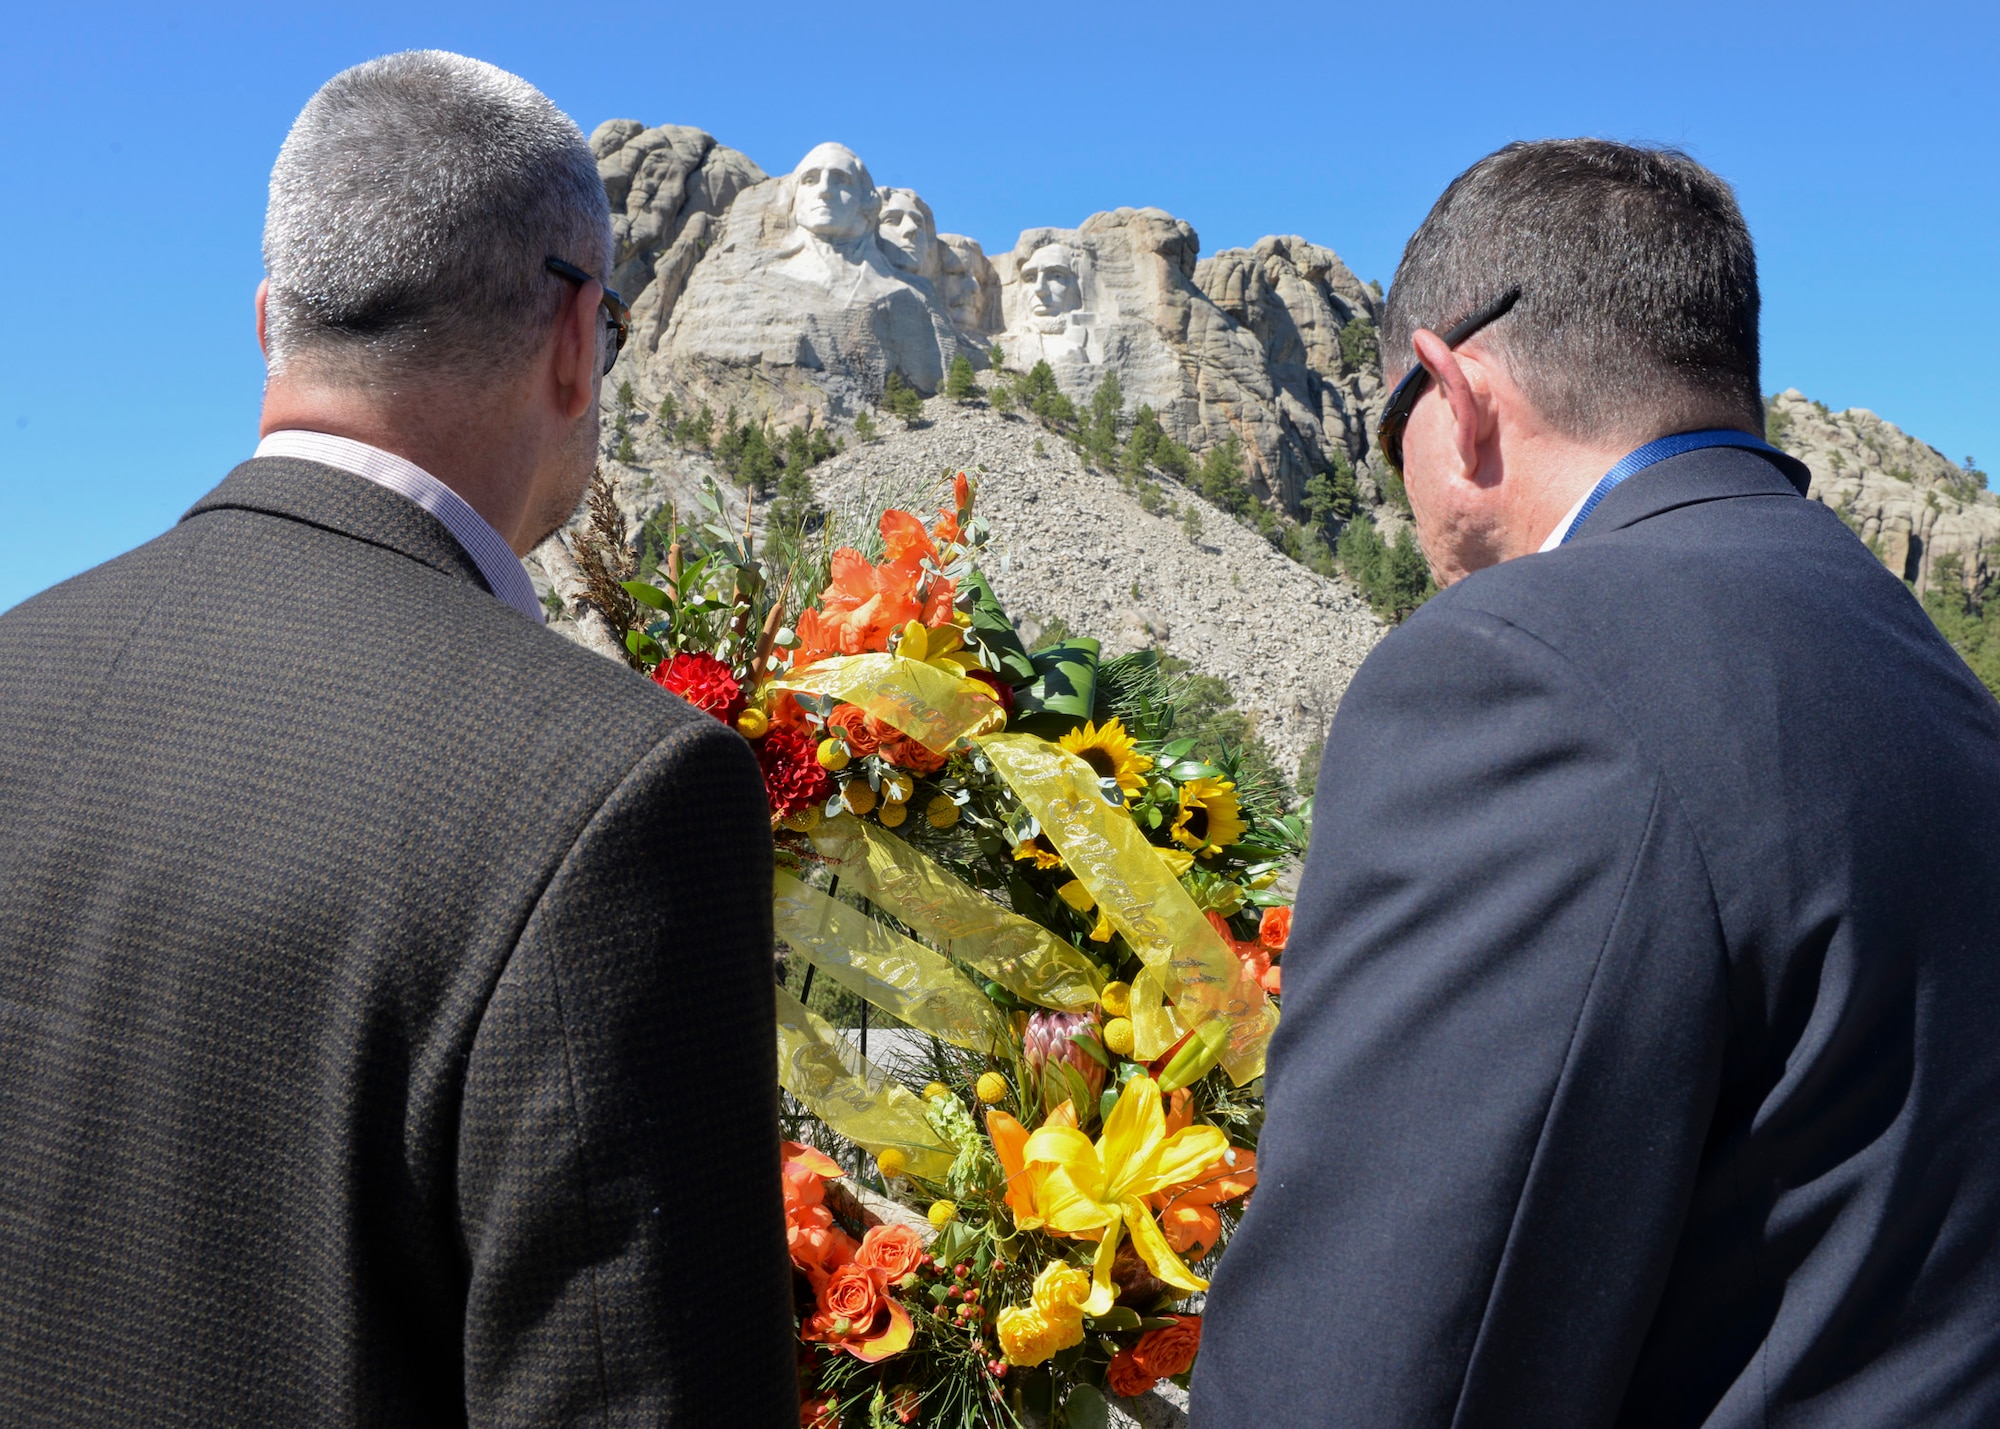 Rear Admiral William Truelove, Canadian Navy, and John A. Atela, director of the Office of Partner Engagement, stand in silence at the Mount Rushmore National Memorial, S.D., Sept. 11, 2016, to honor the 15th anniversary of the attacks on Sept. 11, 2001. A wreath laying ceremony was conducted by senior foreign and U.S. attachés on behalf of the Foreign Defense Attaché Corps, an organization based in Washington D.C., and made up of more than 120 nations. (U.S. Air Force photo by Senior Airman Anania Tekurio)